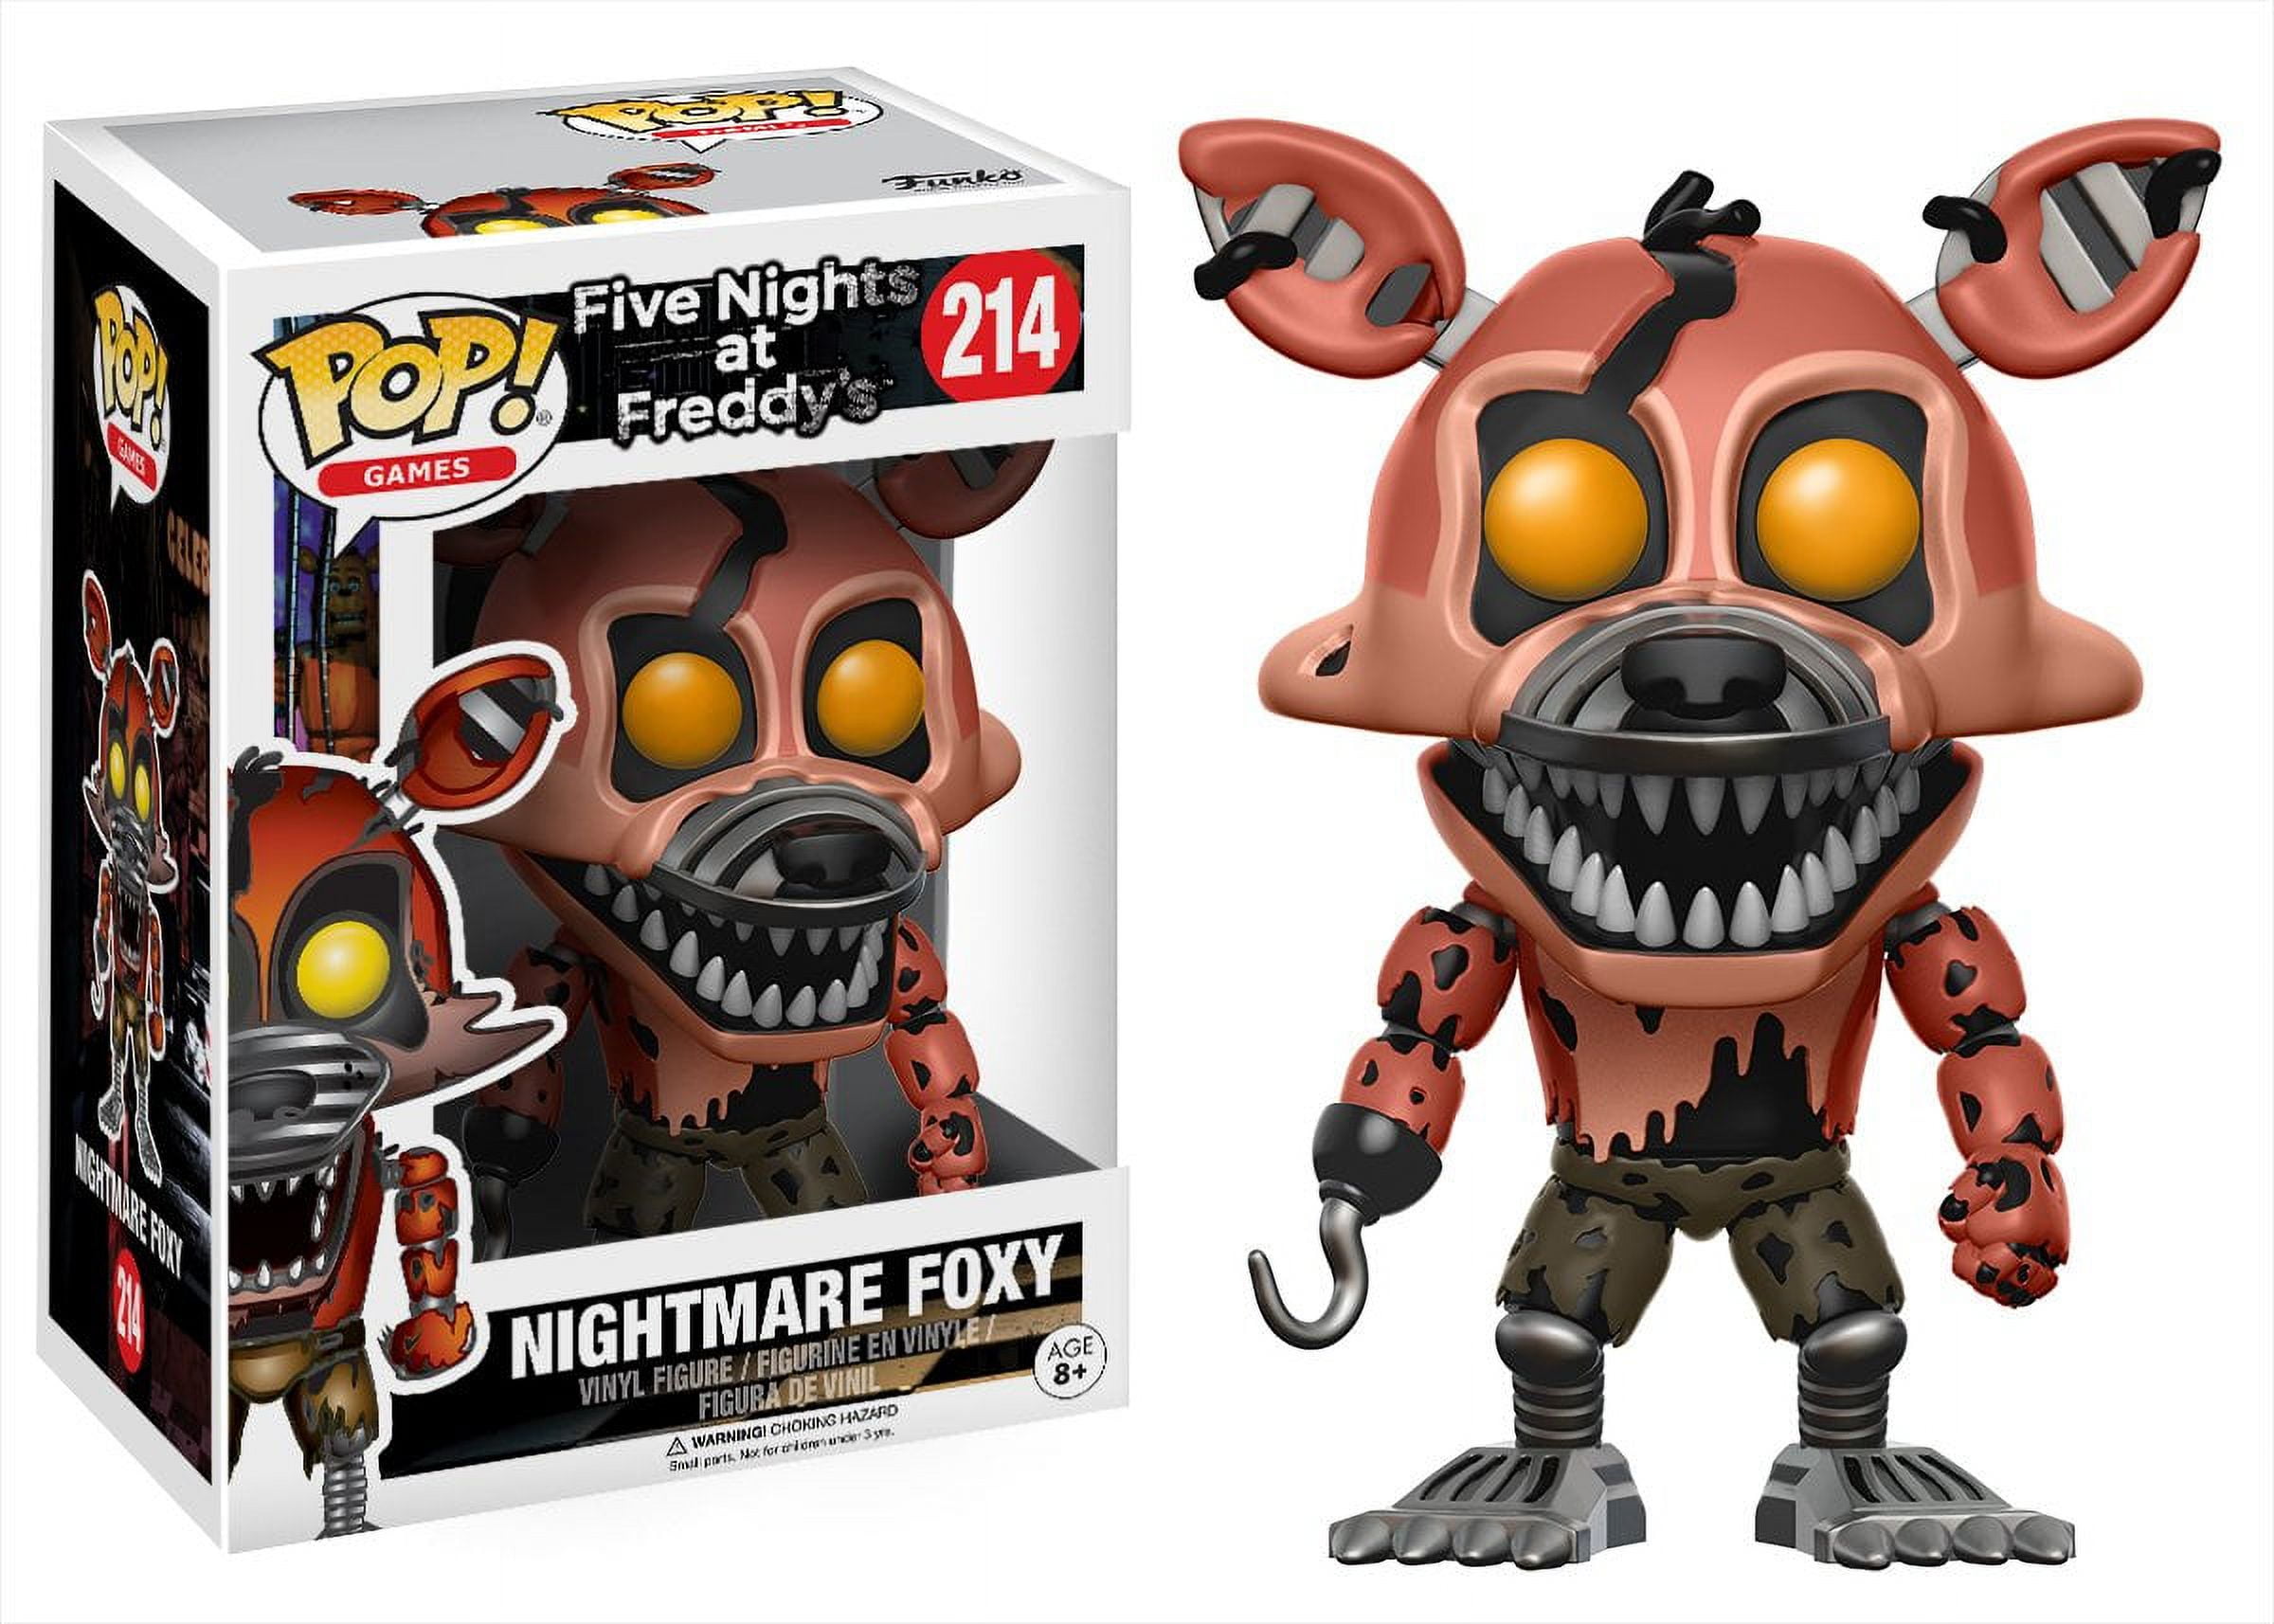 Funko Bitty POP! Five Nights at Freddy's 0.9-in Vinyl Figure Set 4-Pack  (Foxy the Pirate, Cupcake, Chica, Mystery Pop!)